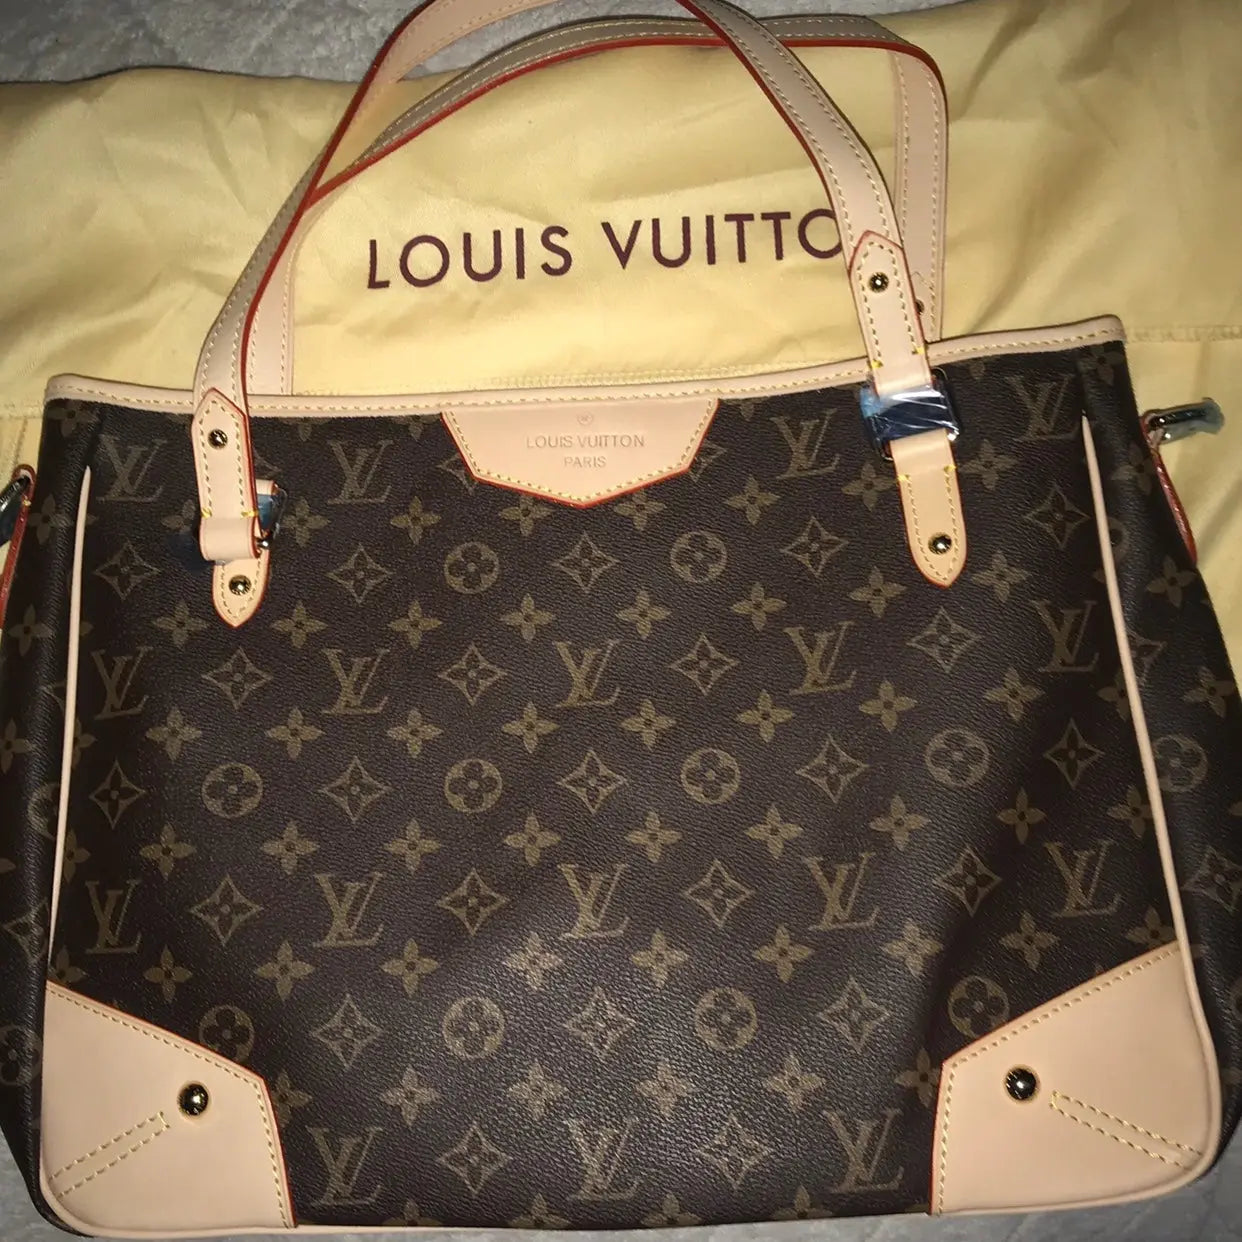 Unauthorized Authentic Louis Vuitton: Authentic or Fake? – Bagaholic